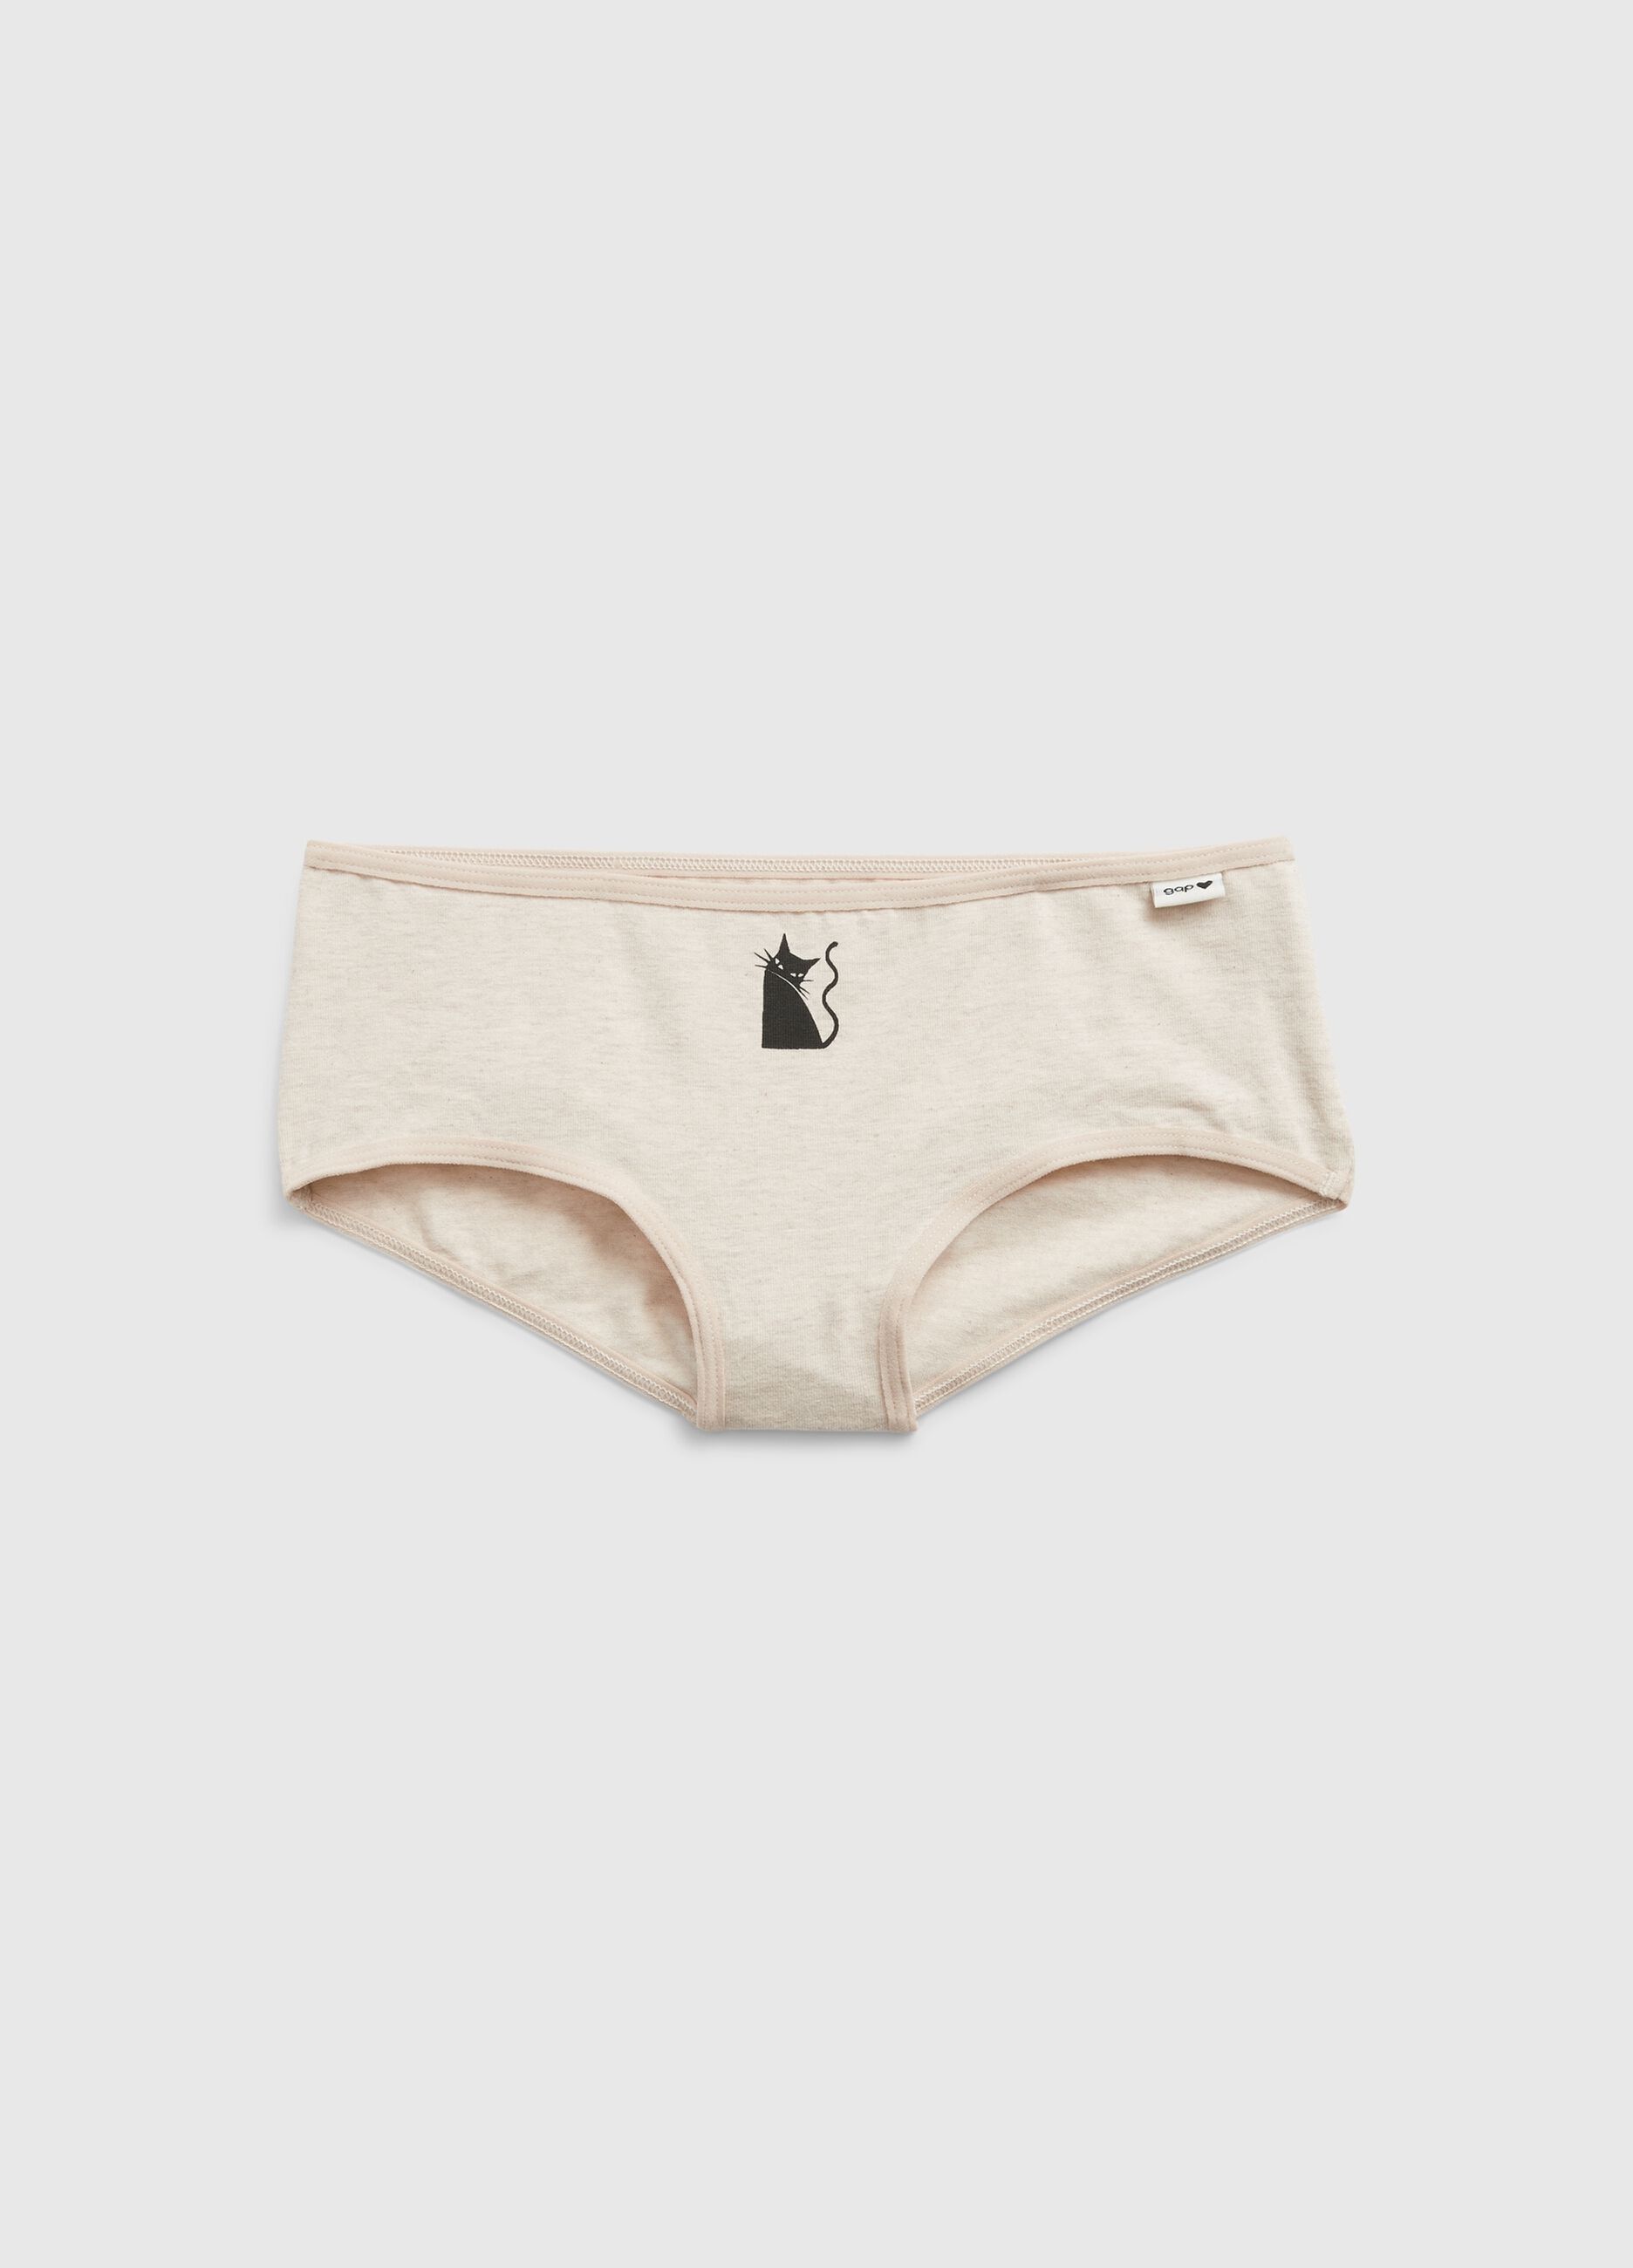 Five-pack French knickers with animals print